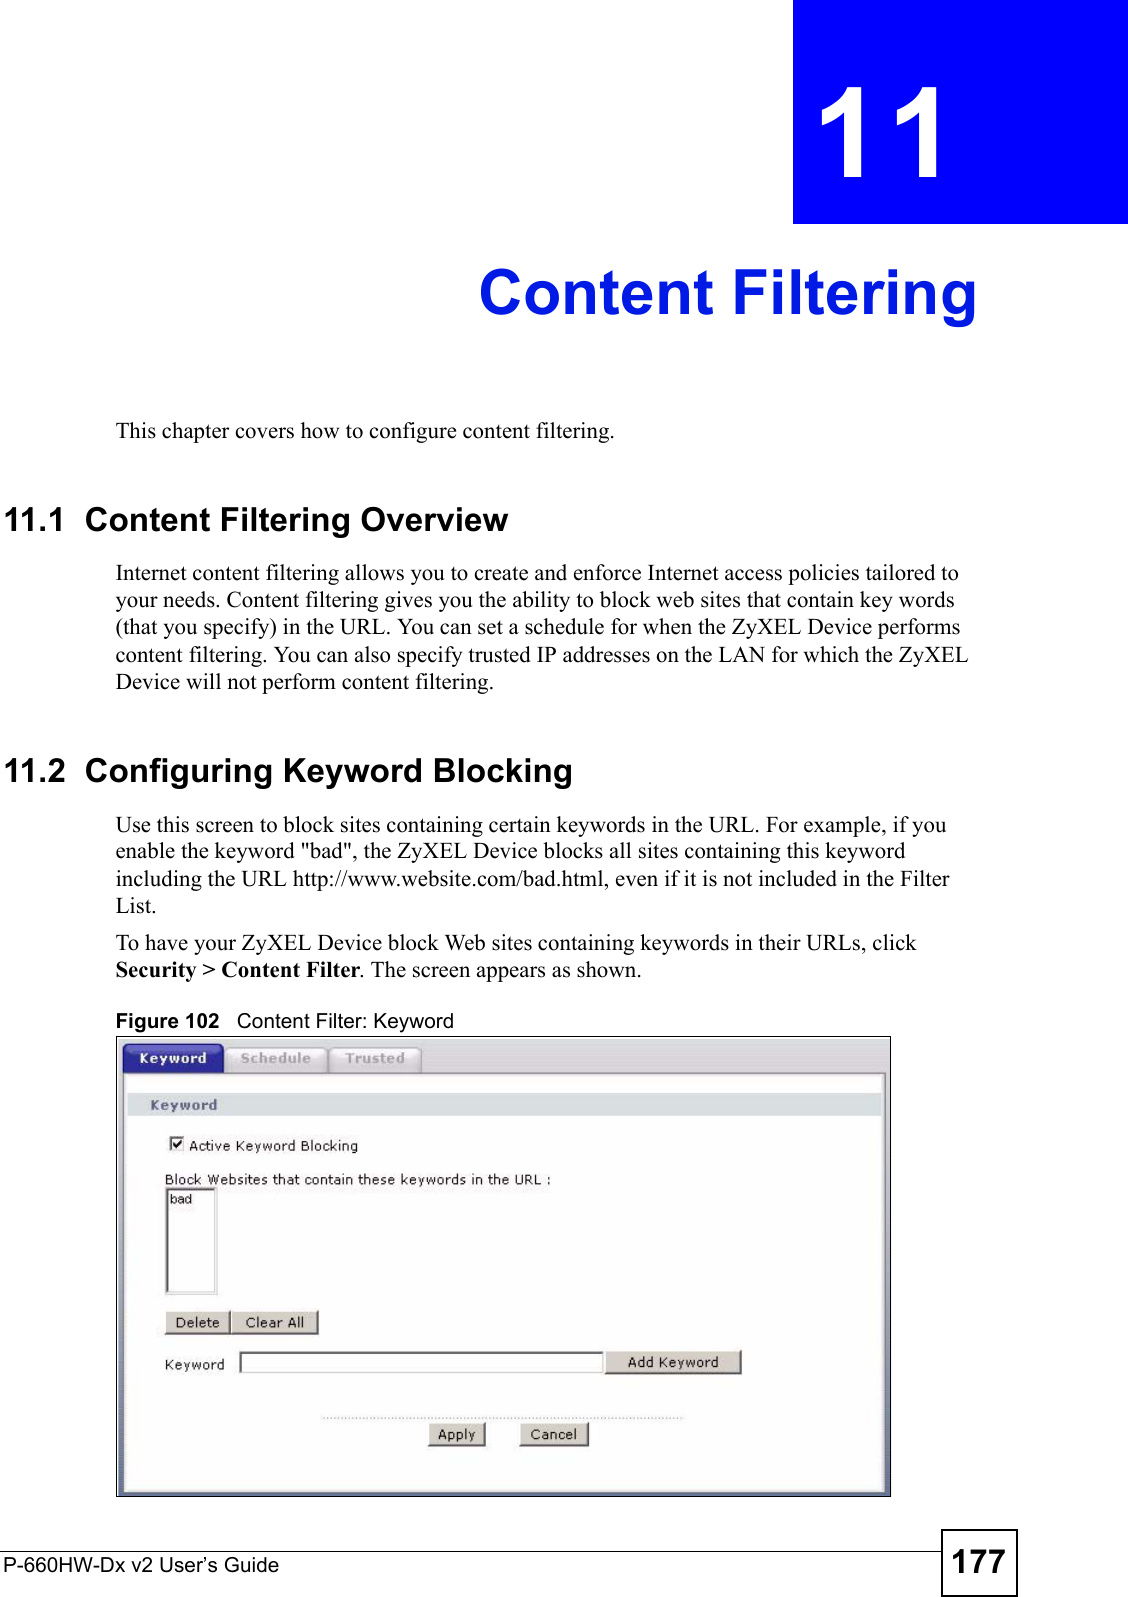 P-660HW-Dx v2 User’s Guide 177CHAPTER  11 Content FilteringThis chapter covers how to configure content filtering.11.1  Content Filtering Overview Internet content filtering allows you to create and enforce Internet access policies tailored to your needs. Content filtering gives you the ability to block web sites that contain key words (that you specify) in the URL. You can set a schedule for when the ZyXEL Device performs content filtering. You can also specify trusted IP addresses on the LAN for which the ZyXEL Device will not perform content filtering.11.2  Configuring Keyword Blocking Use this screen to block sites containing certain keywords in the URL. For example, if you enable the keyword &quot;bad&quot;, the ZyXEL Device blocks all sites containing this keyword including the URL http://www.website.com/bad.html, even if it is not included in the Filter List. To have your ZyXEL Device block Web sites containing keywords in their URLs, click Security &gt; Content Filter. The screen appears as shown.Figure 102   Content Filter: Keyword